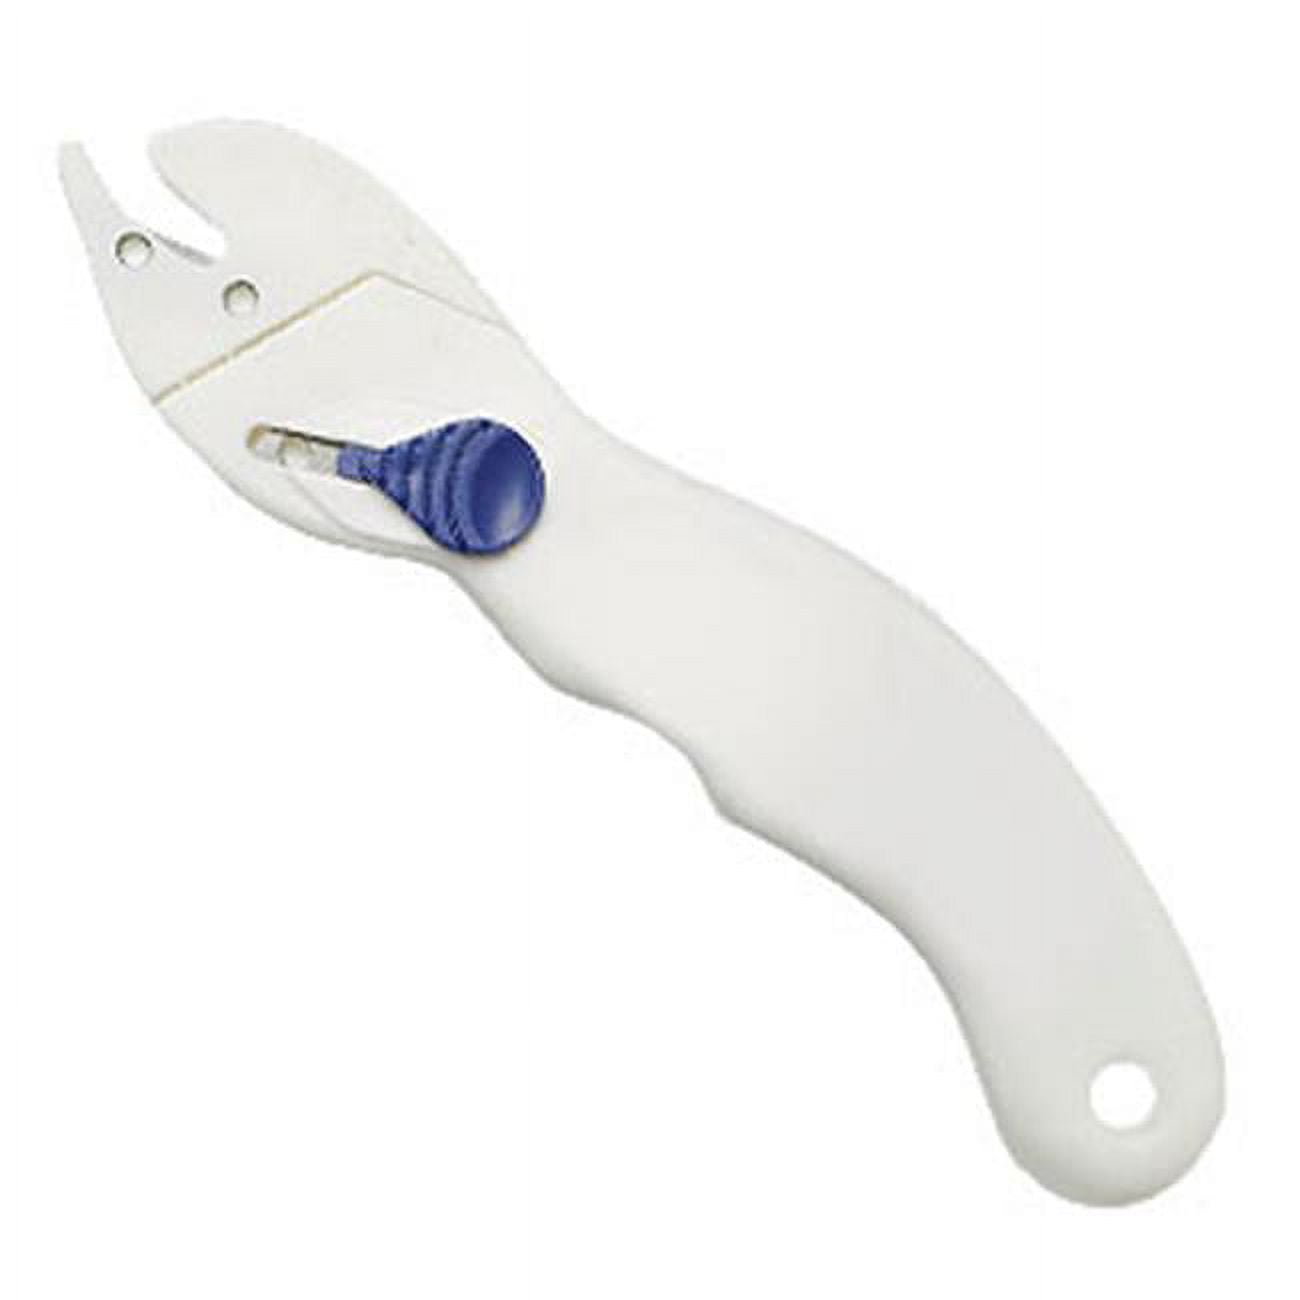 OpenX Dual Blade Package Opener, Single Unit